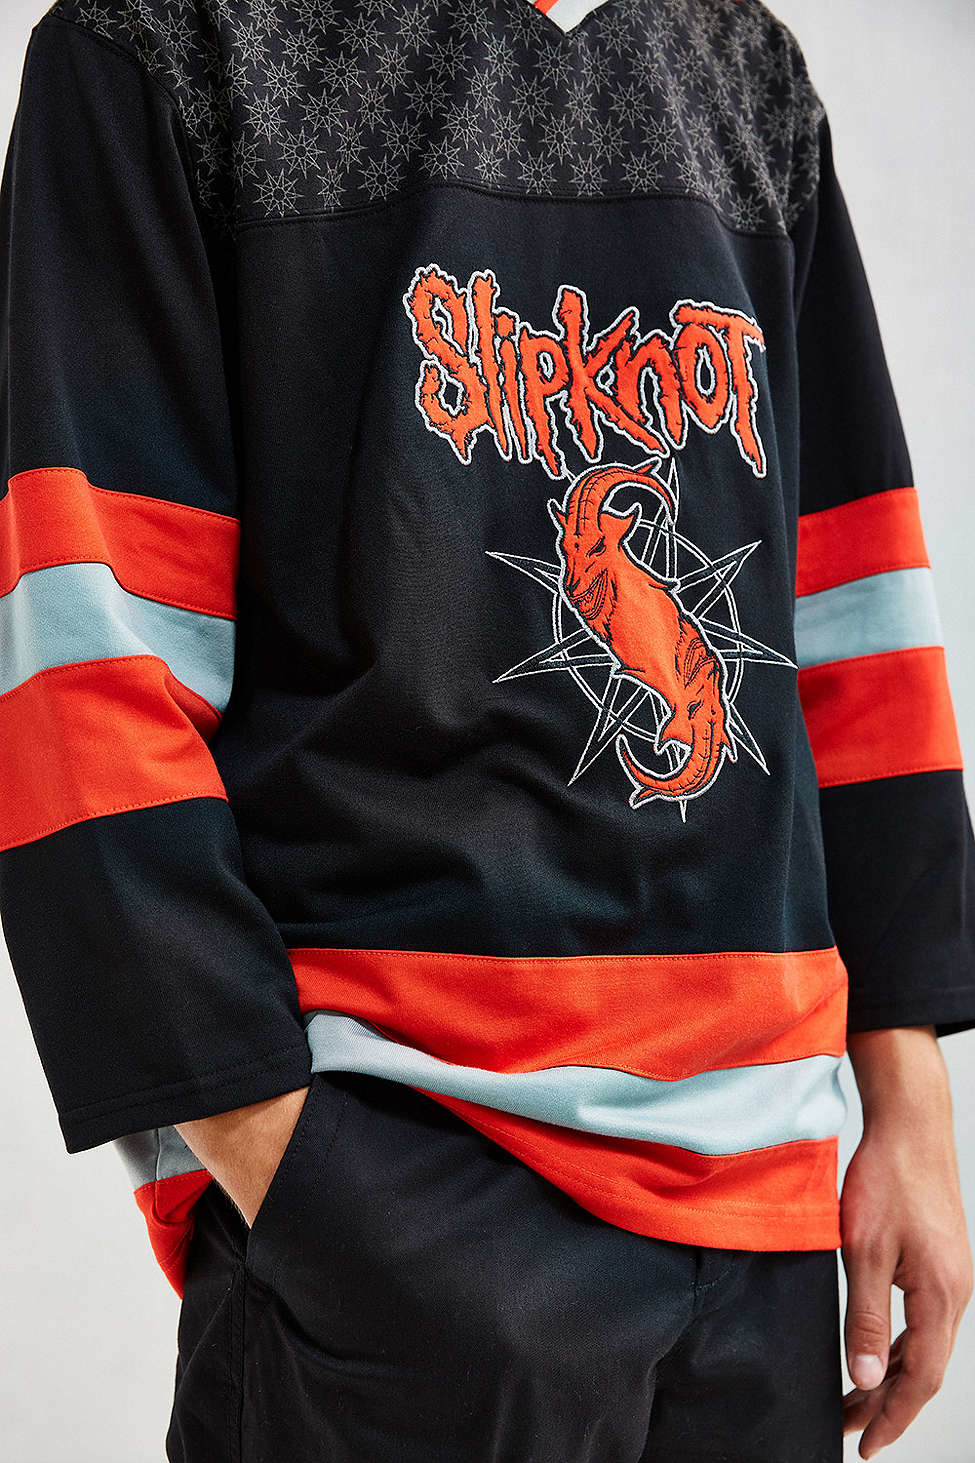 Download Lyst - Urban Outfitters Slipknot Hockey Jersey in Black ...